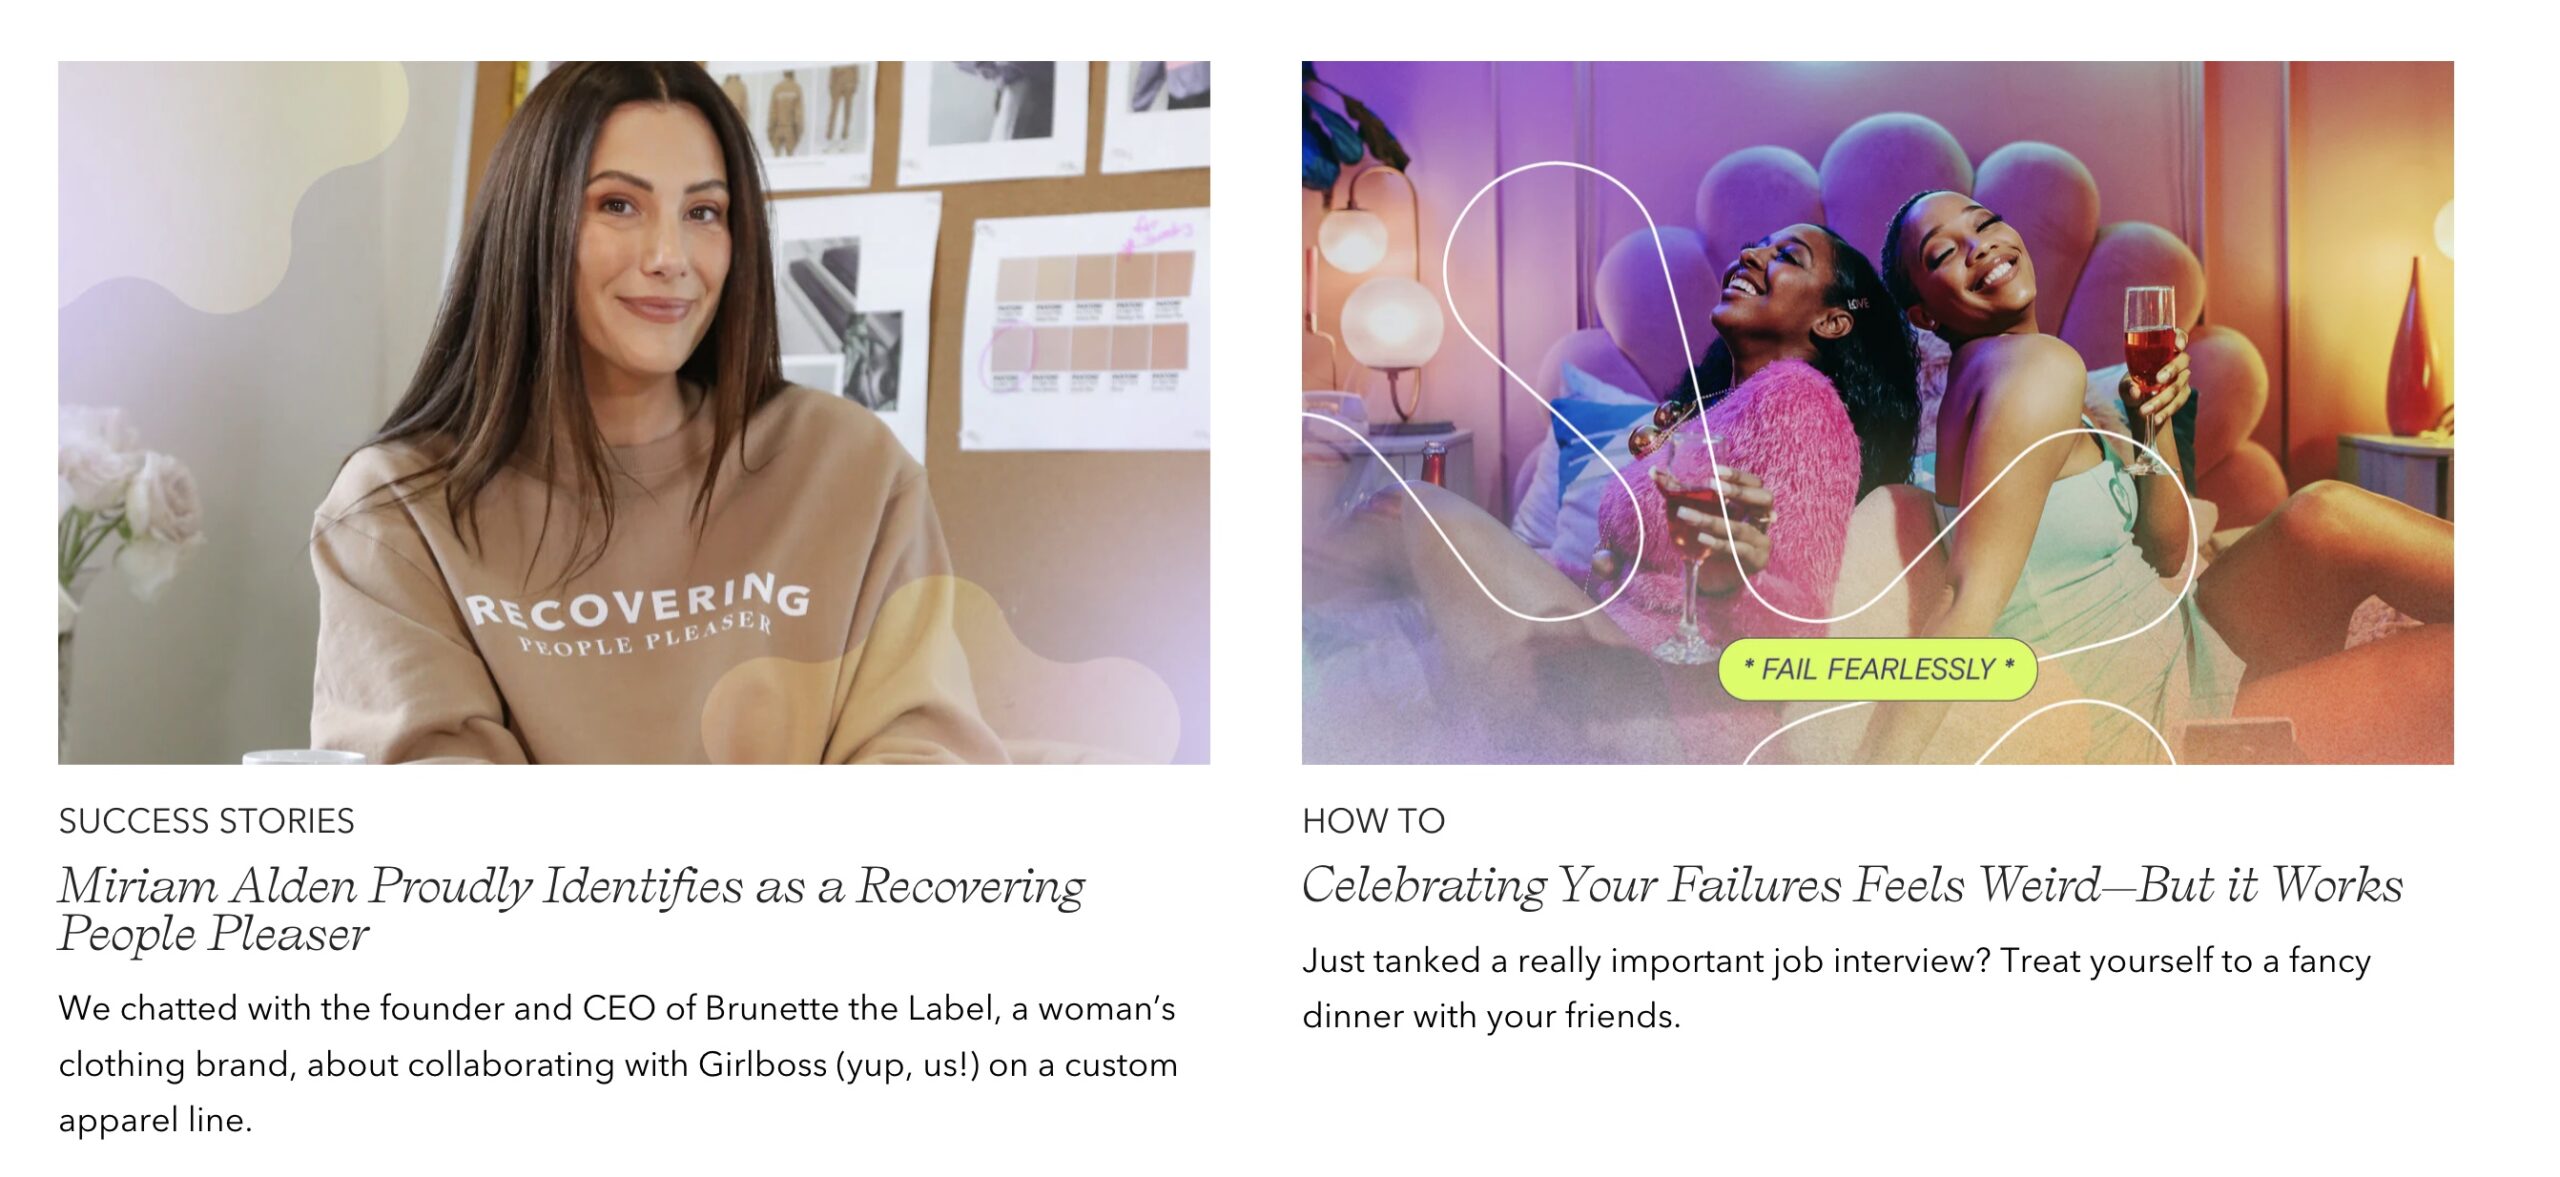 Girlboss is a community that empowers ambitious women to achieve success on their own terms. The website offers a variety of content, including articles, resources, and insights on career inspiration and the future of work.